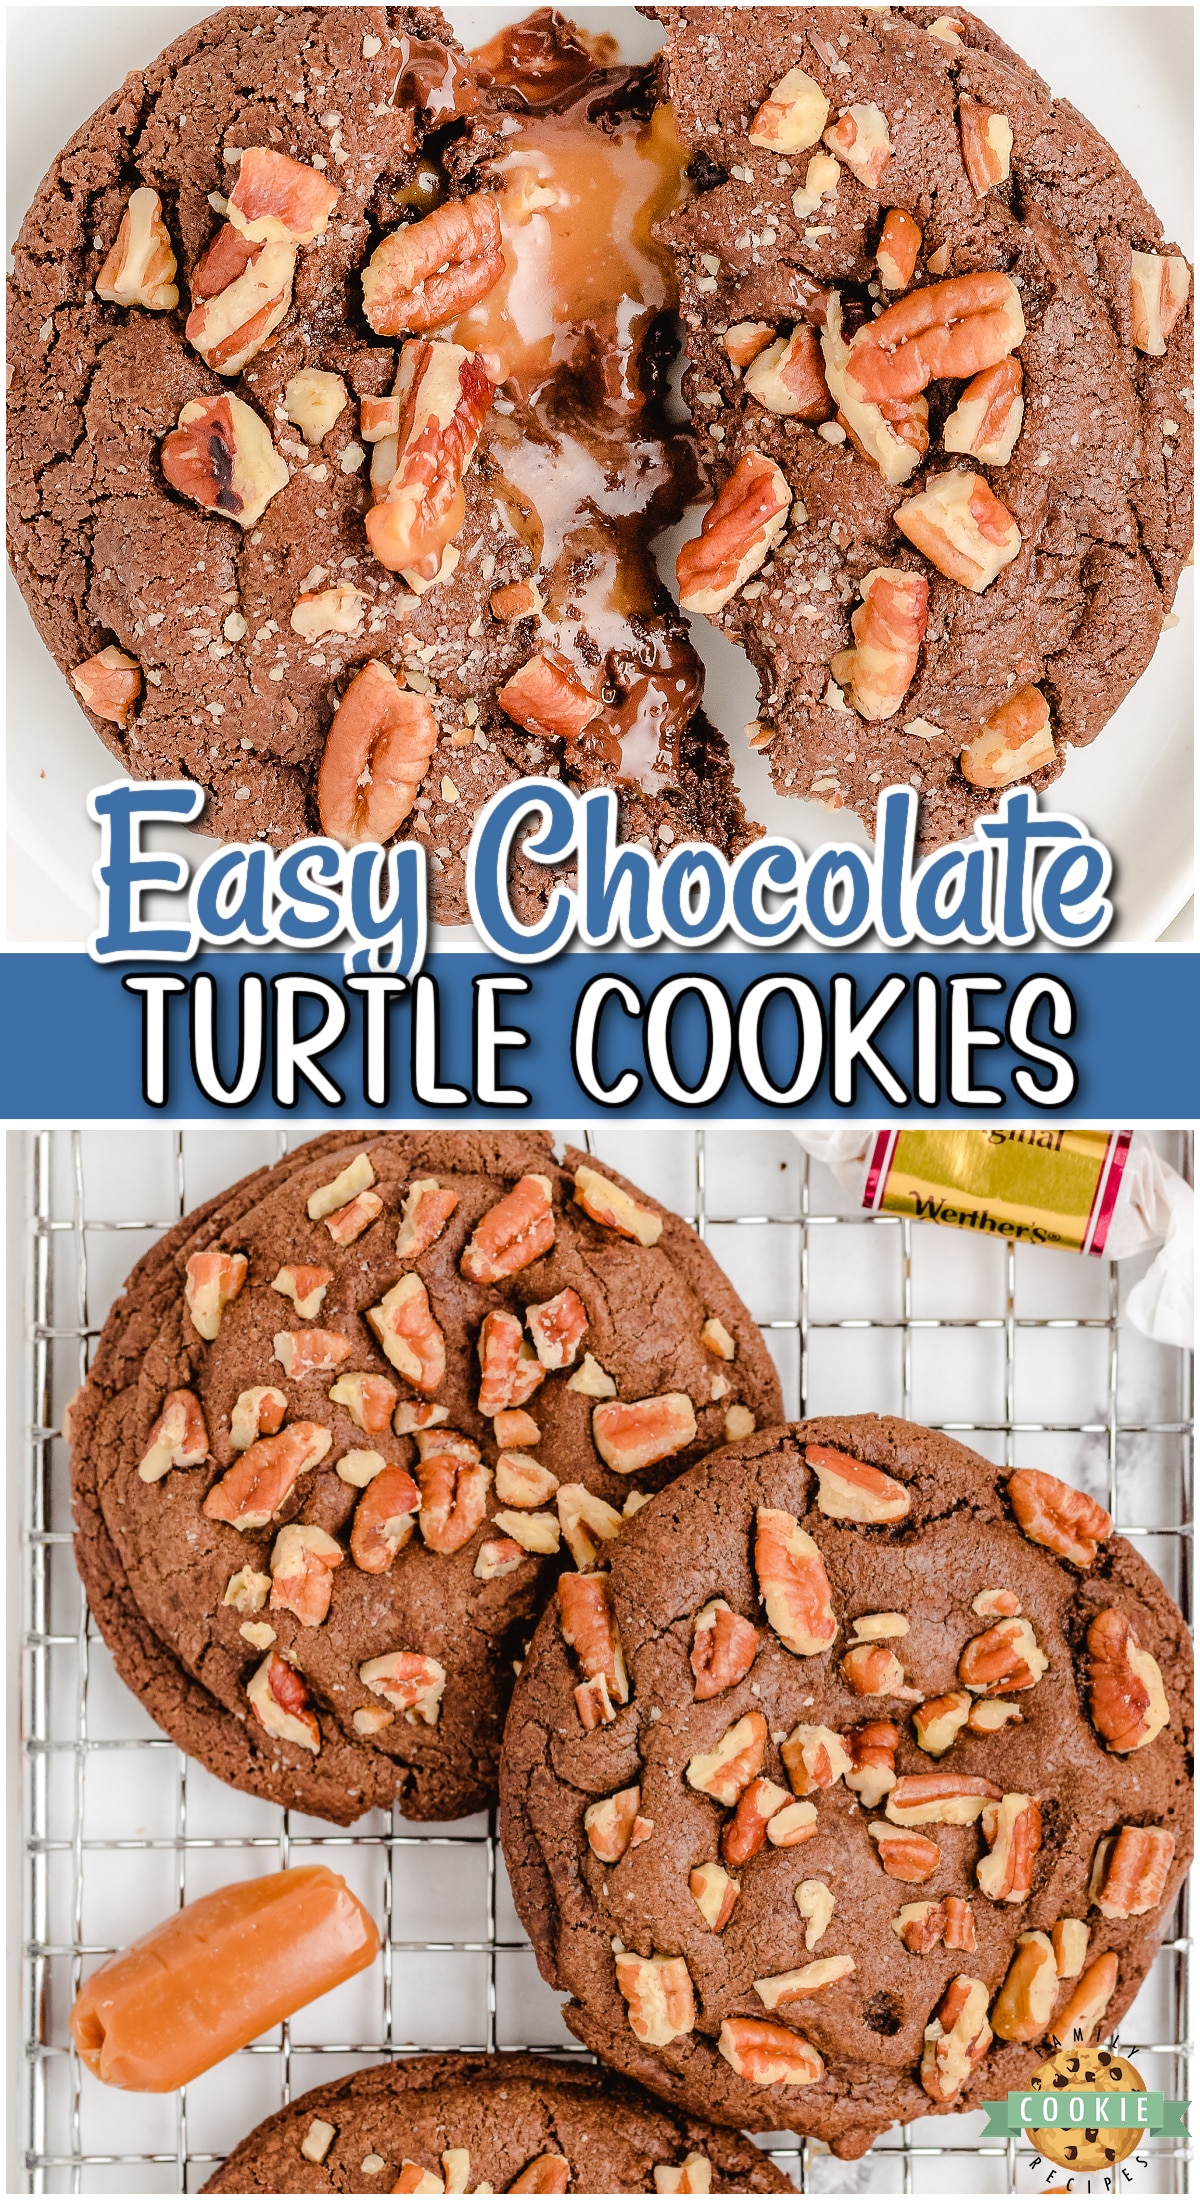 Chocolate Turtle Cookies are double chocolate chip cookies stuffed with caramel & pecans! Decadent Turtle Cookie recipe that everyone loves!